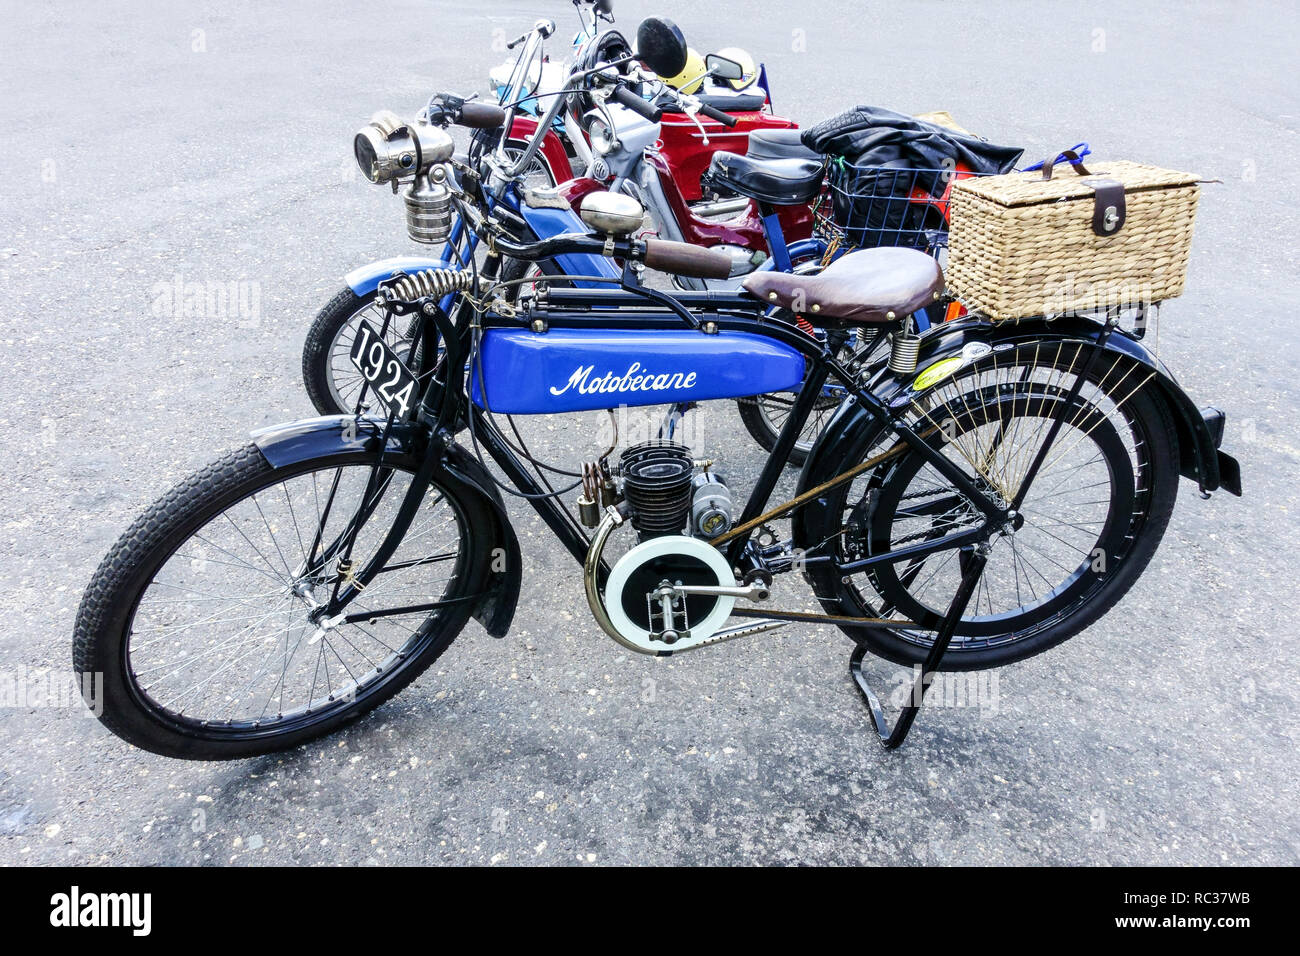 peugeot 103 sp chooper and mbk 51 motobecane caferacer french vintage retro  moped in style custom and racing parked in city street Photos